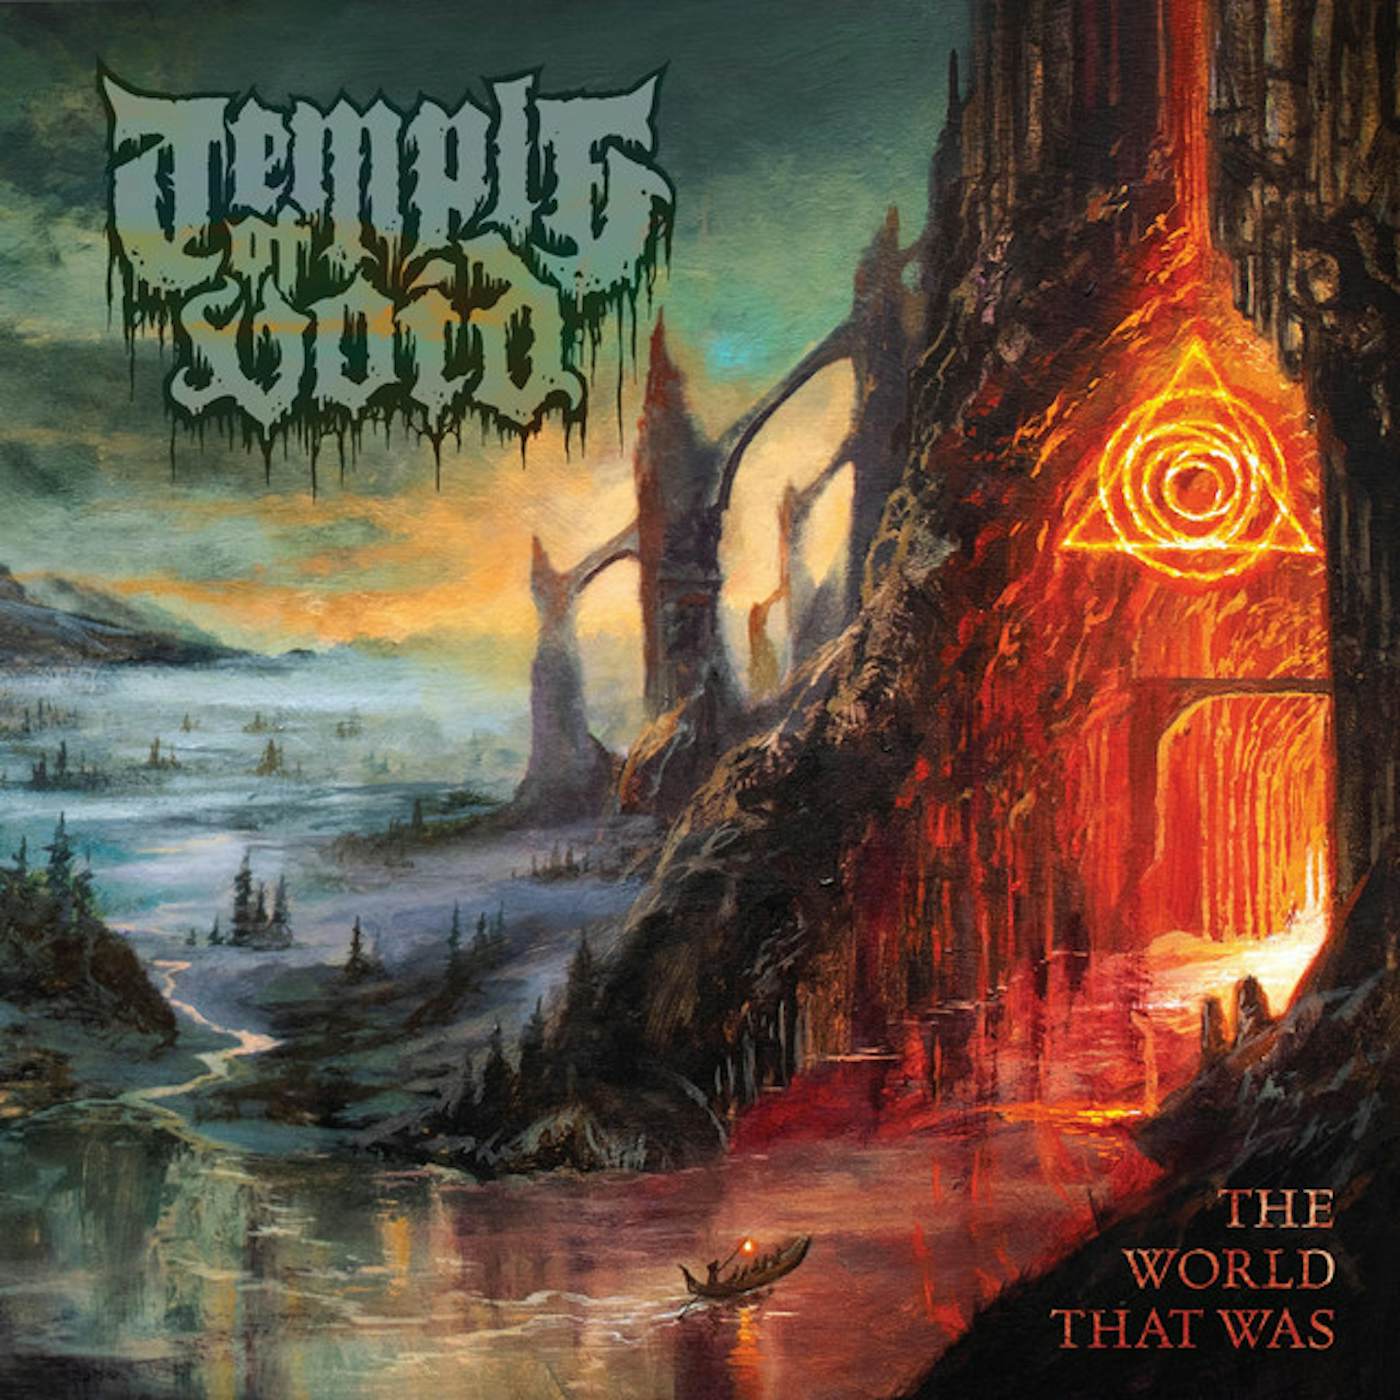 Temple of Void WORLD THAT WAS CD